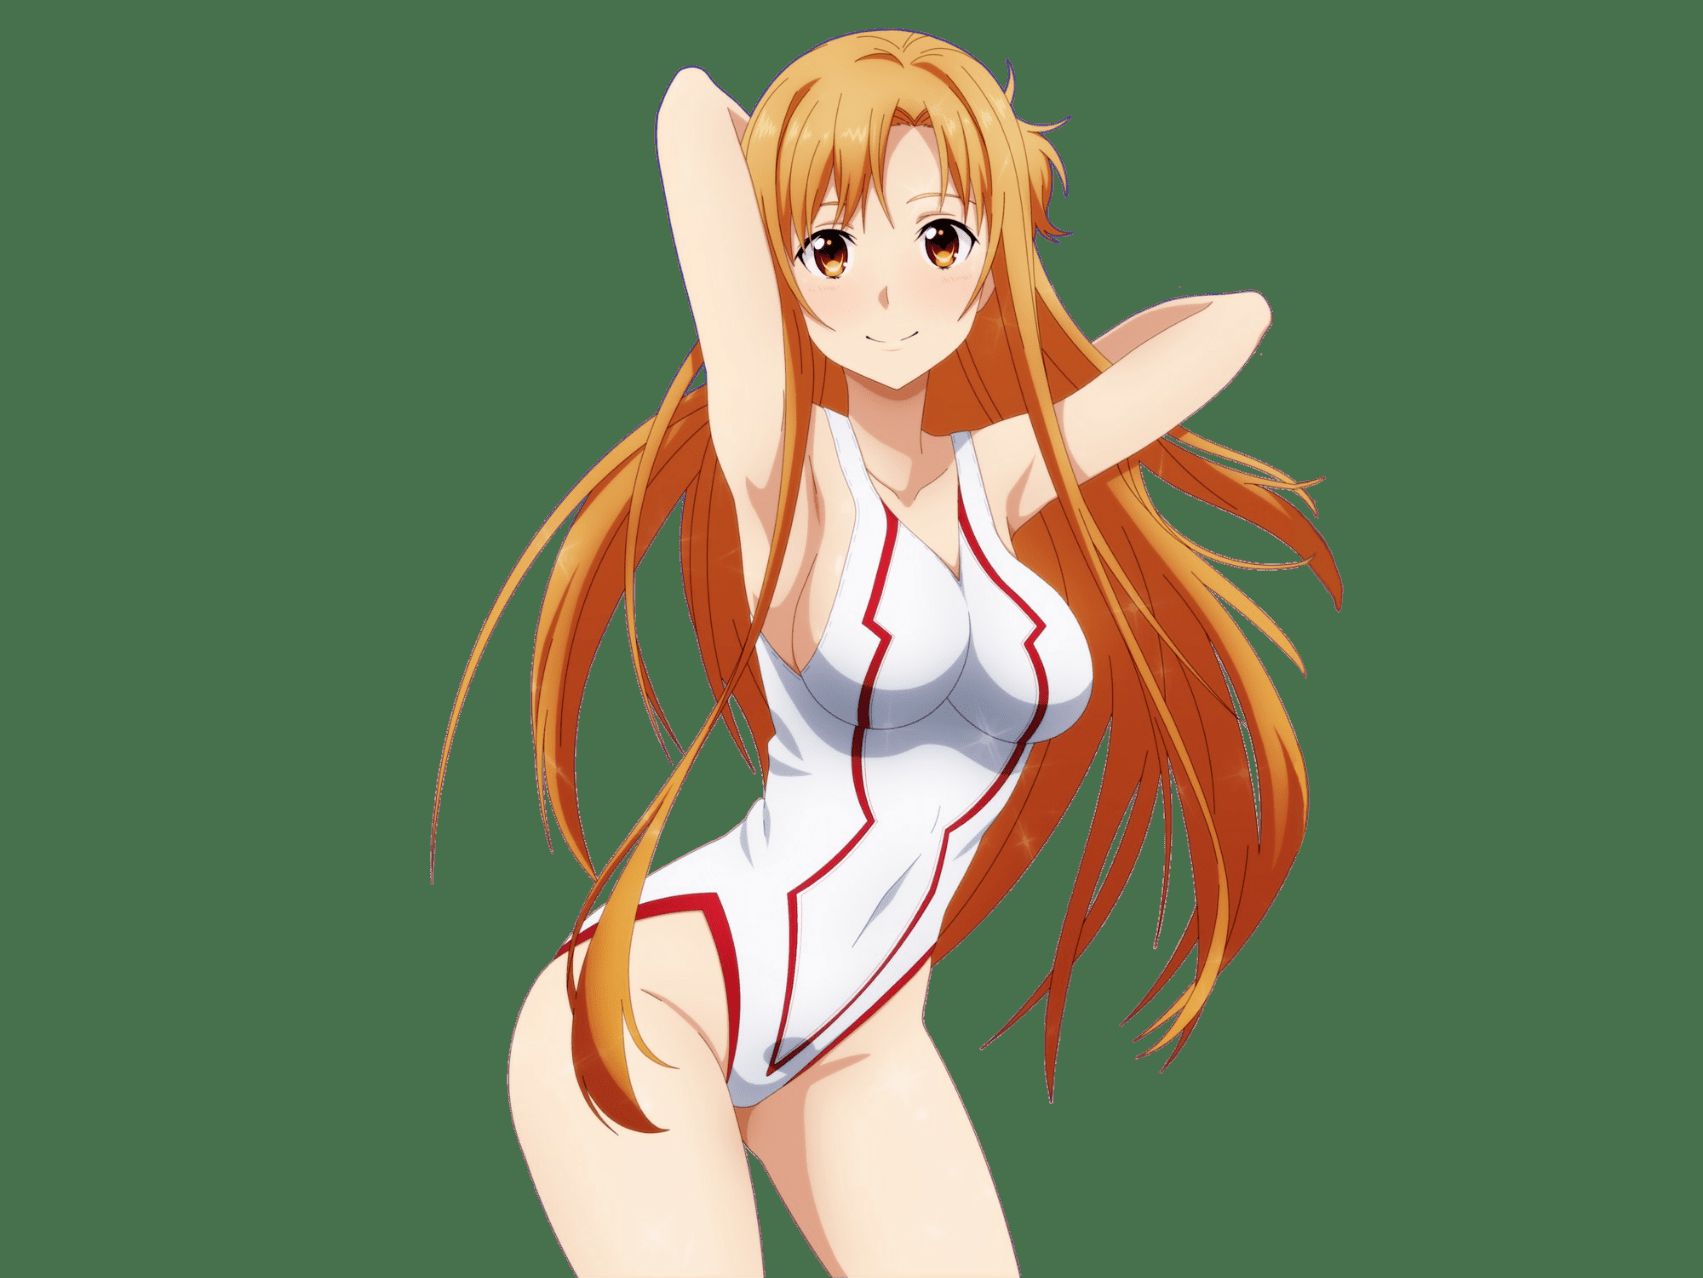 [Sword Art Online (SAO)] Erotic images such as Asuna-chan 74th 35